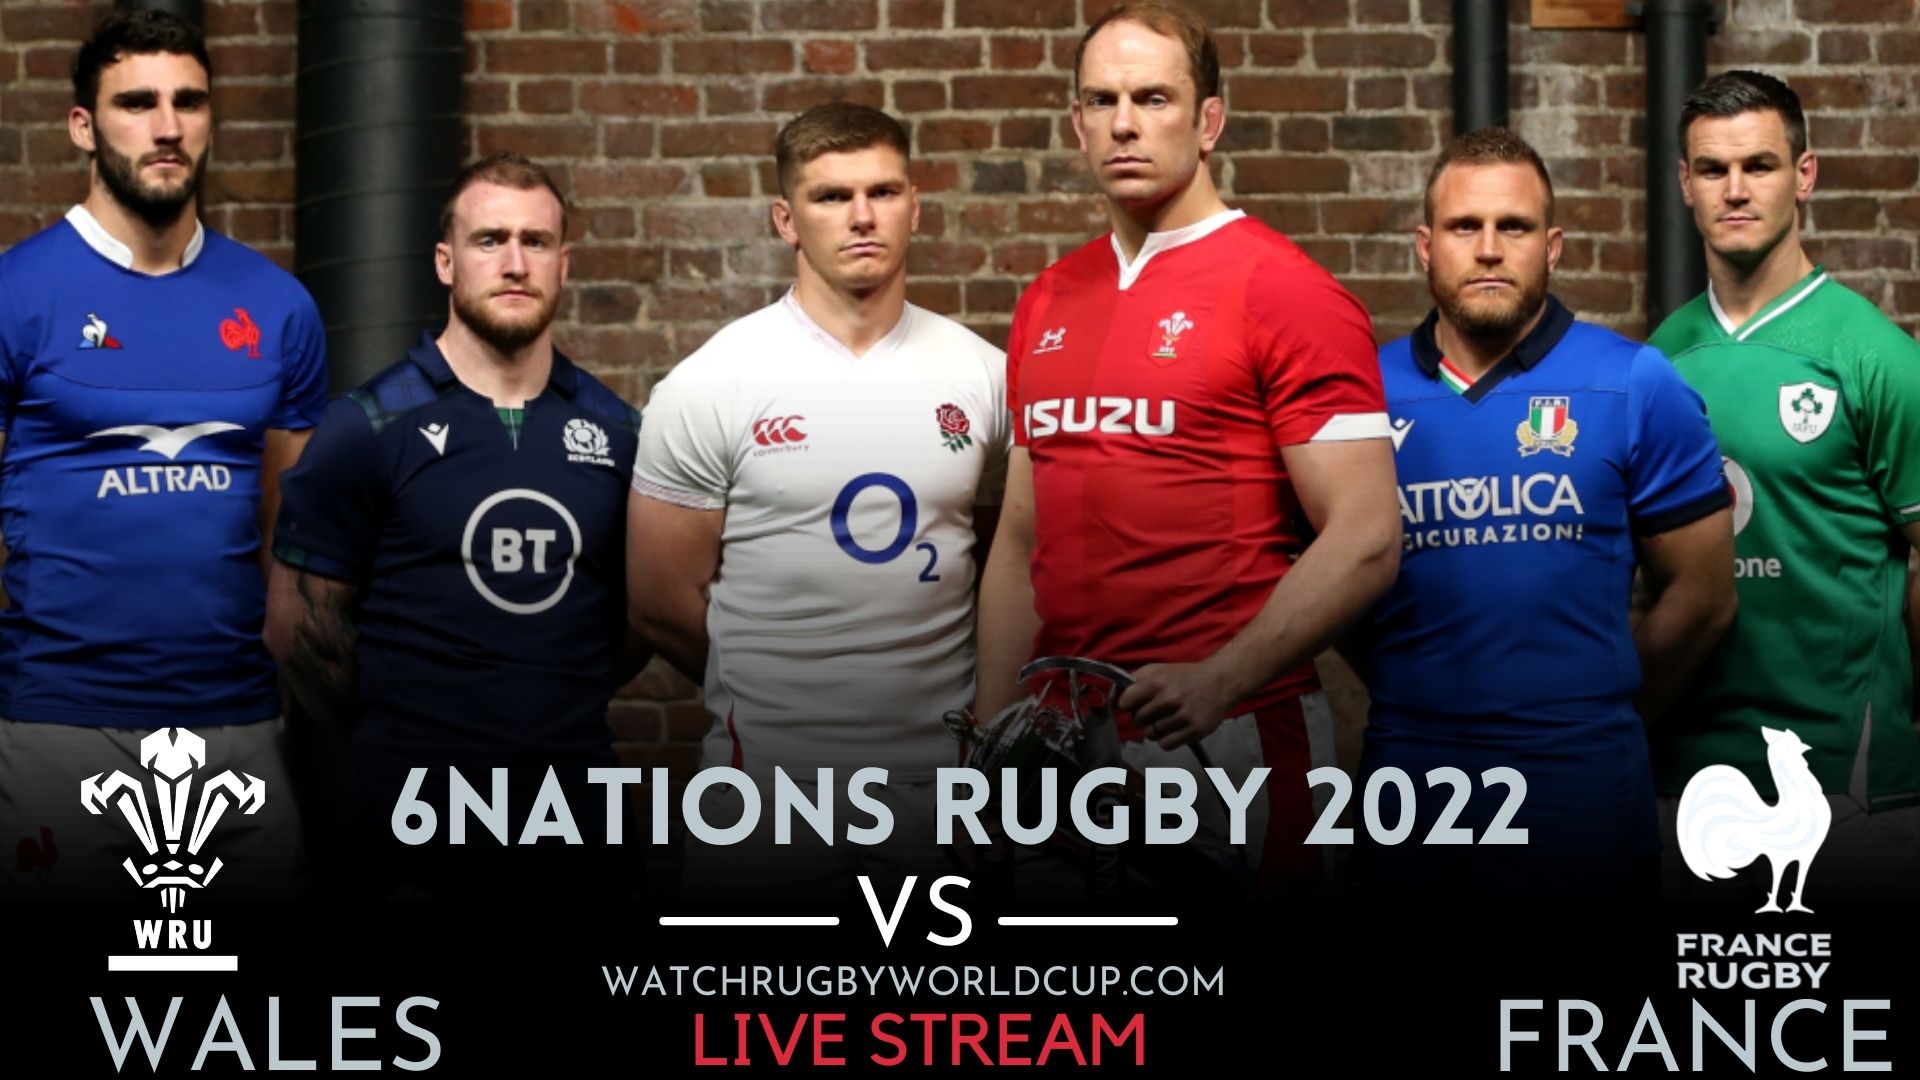 Wales Vs France Live Stream 2022 Rd 4 | Full Match Replay